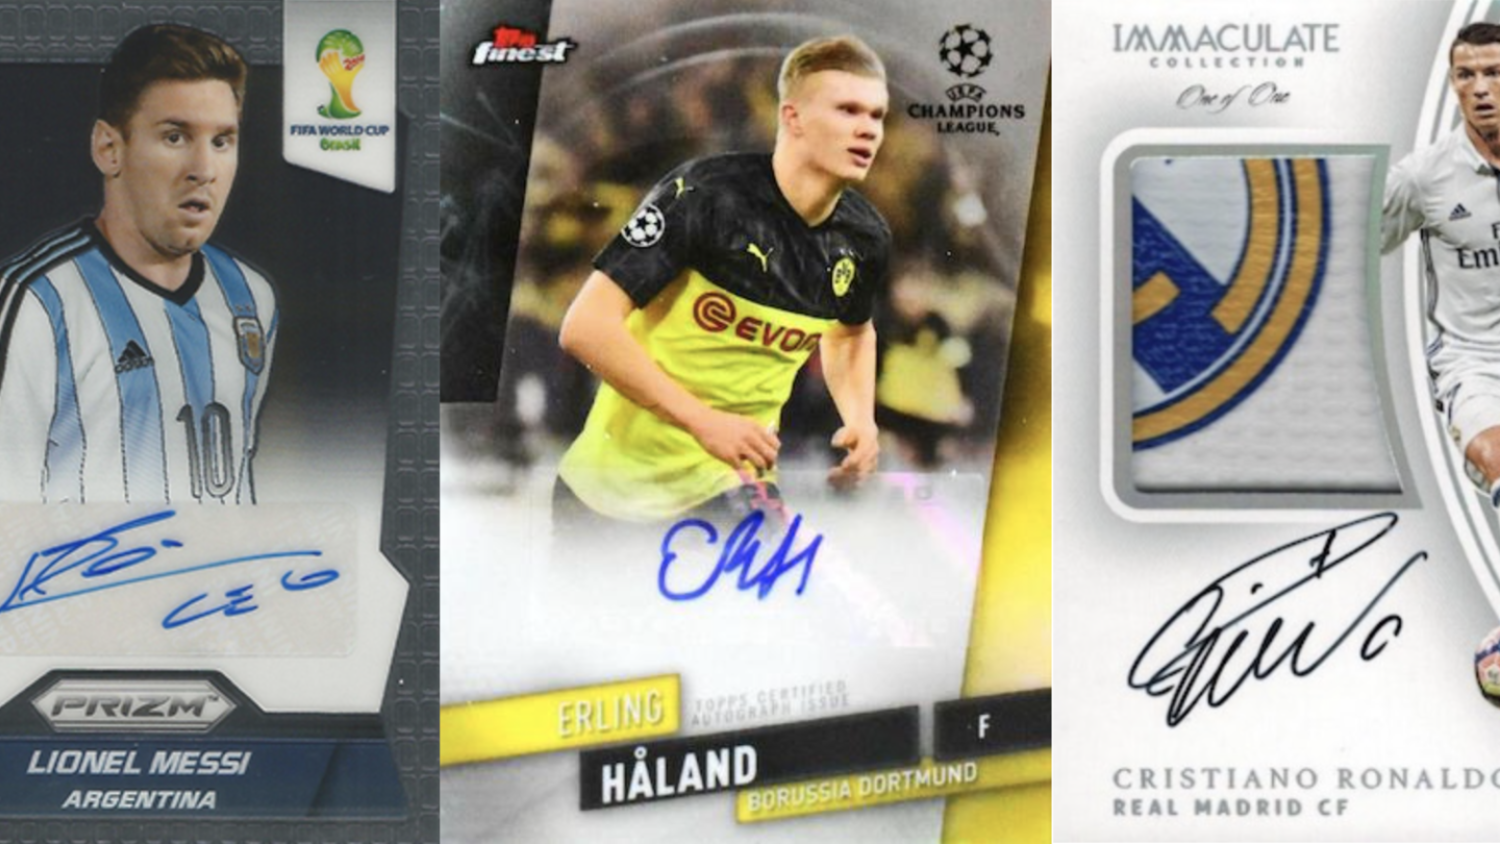 7 Greatest Football Card Autograph Sets of All-Time